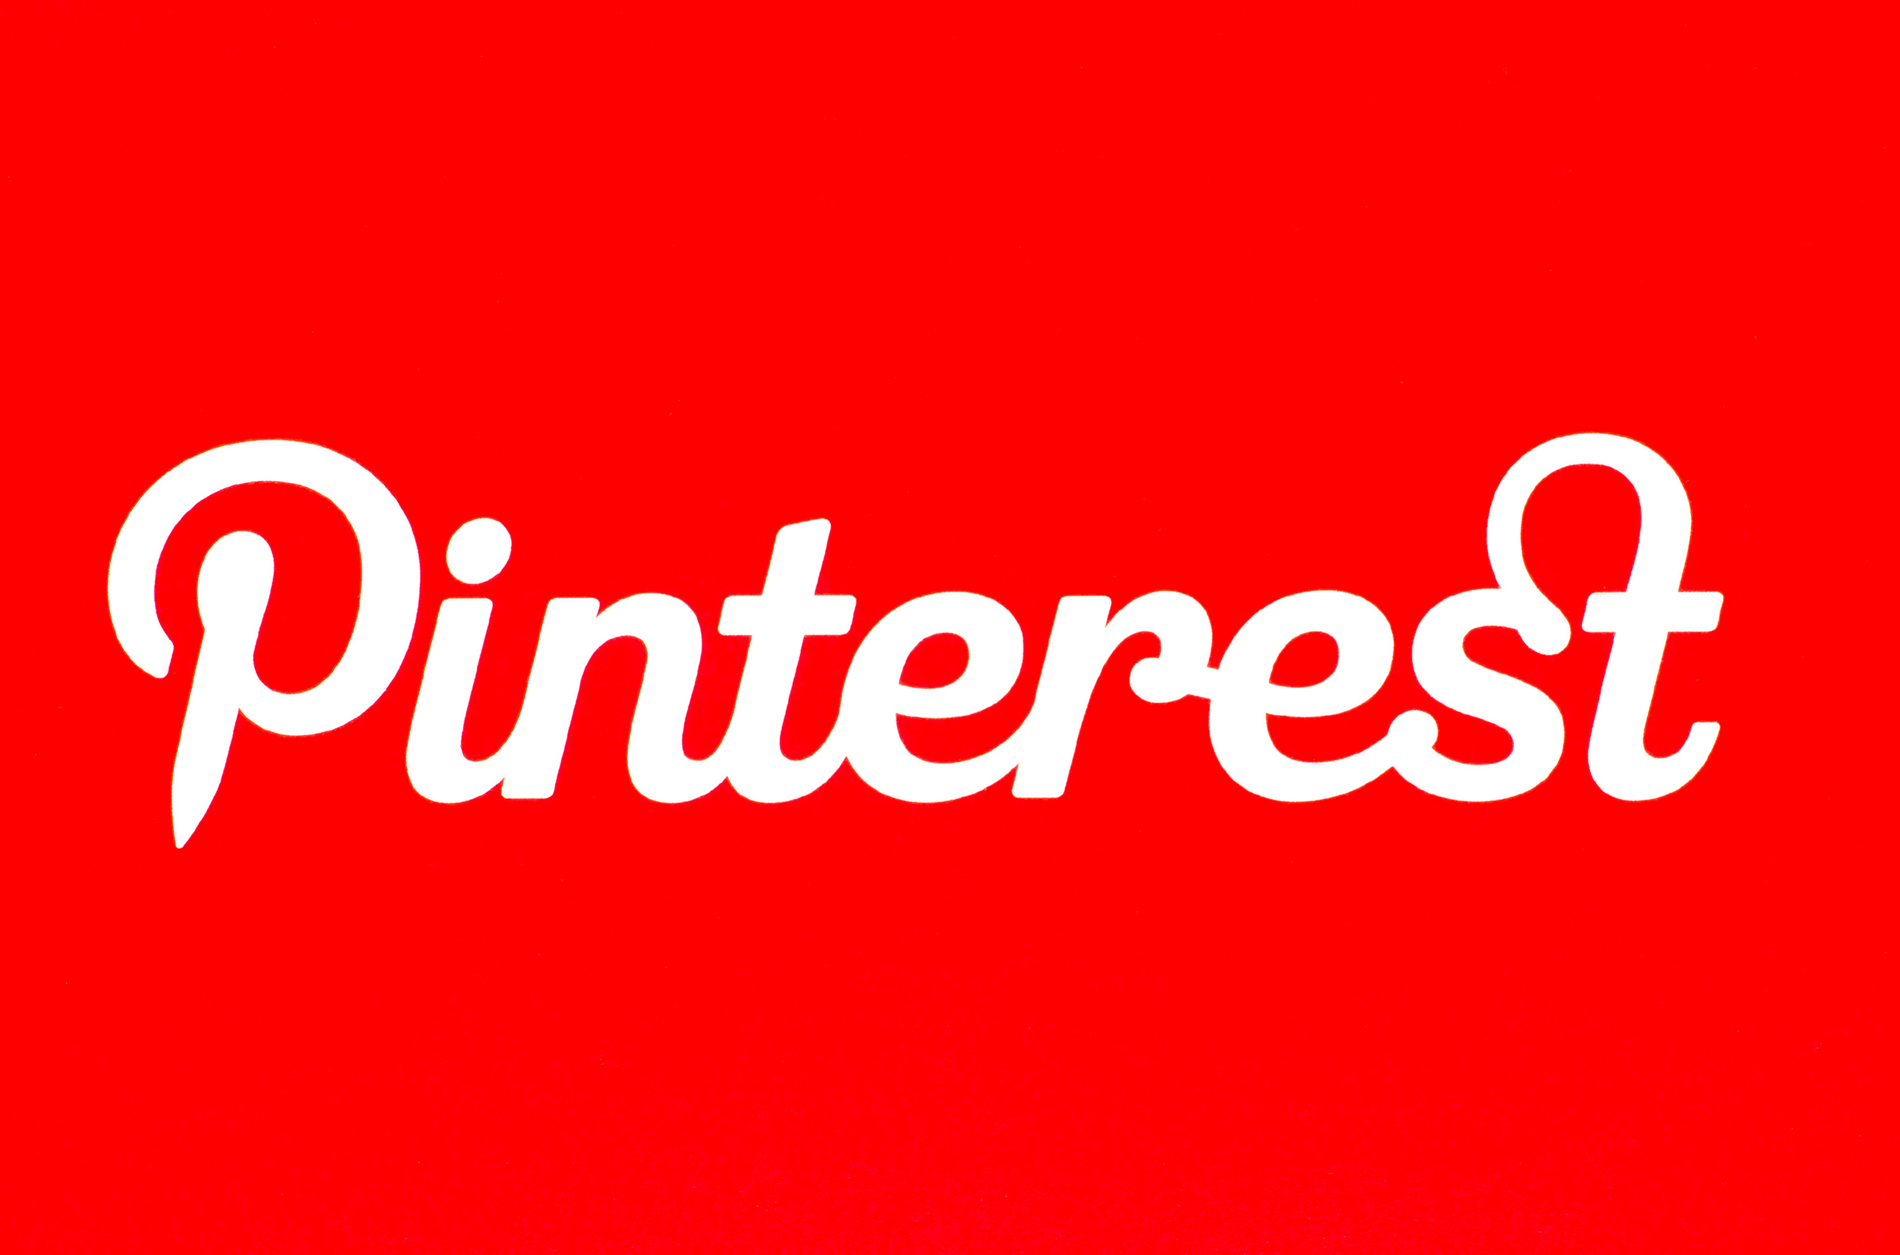 How to Use Pinterest in Your Dental Practice